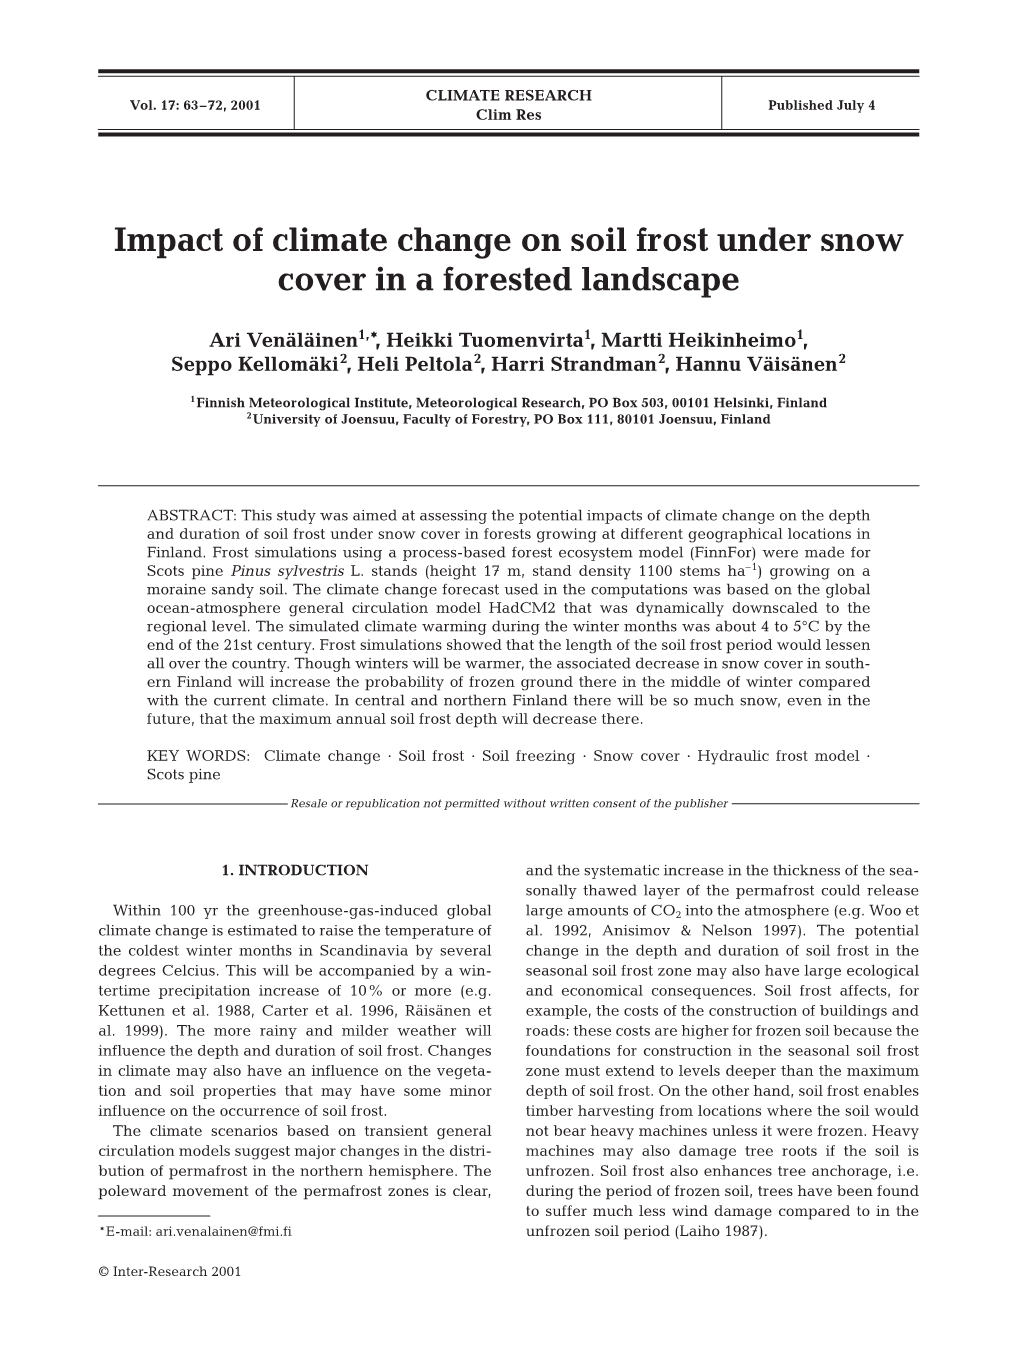 Impact of Climate Change on Soil Frost Under Snow Cover in a Forested Landscape